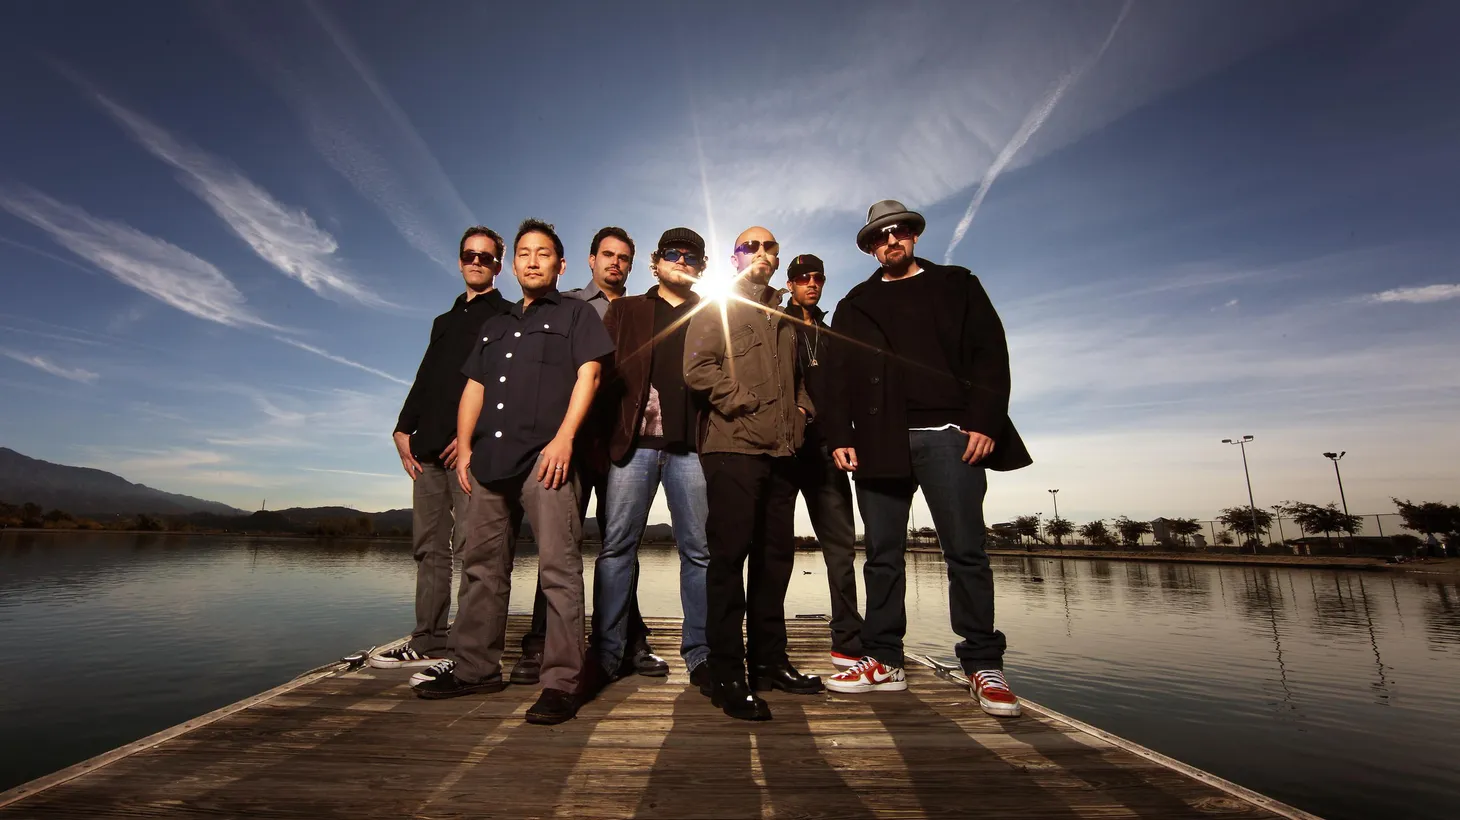 Ozomatli returns to our studios to celebrate the band's latest release "Fire Away," as well as an EP of remixes produced by KCRW DJs. Music from the celebrated collective is a sonic collision of salsa, dancehall, cumbia, hip hop and more. Hear it all in a live session on Morning Becomes Eclectic at 11:15am.